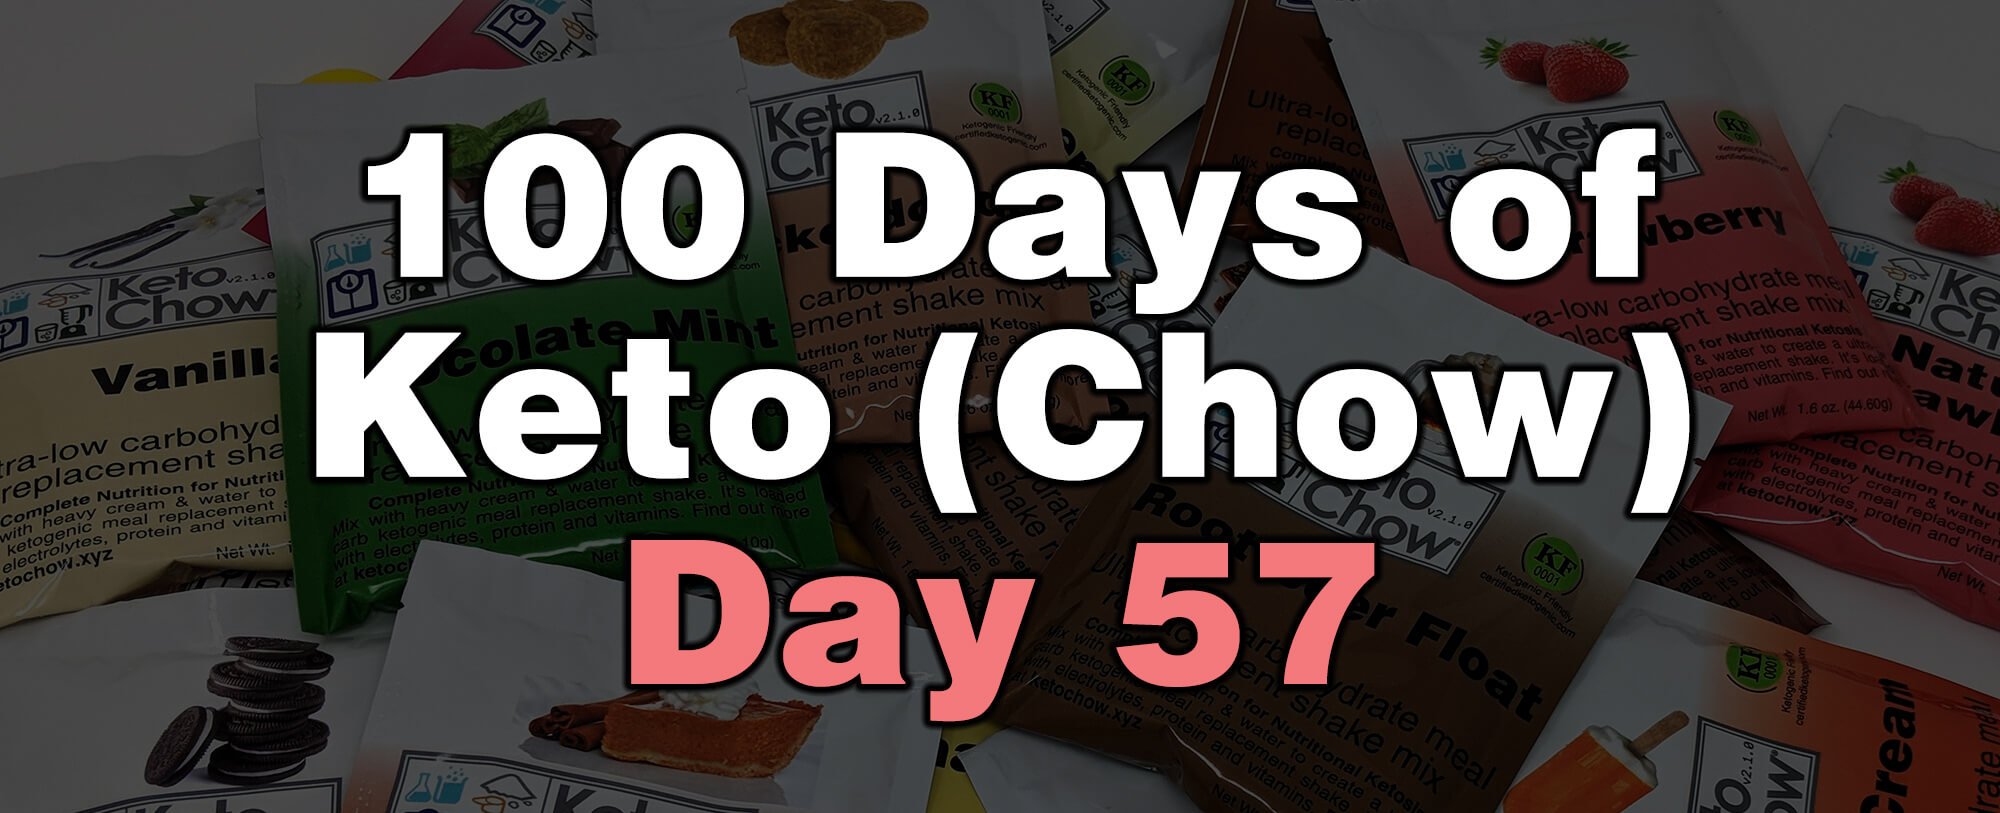 100 days of keto chow day 57